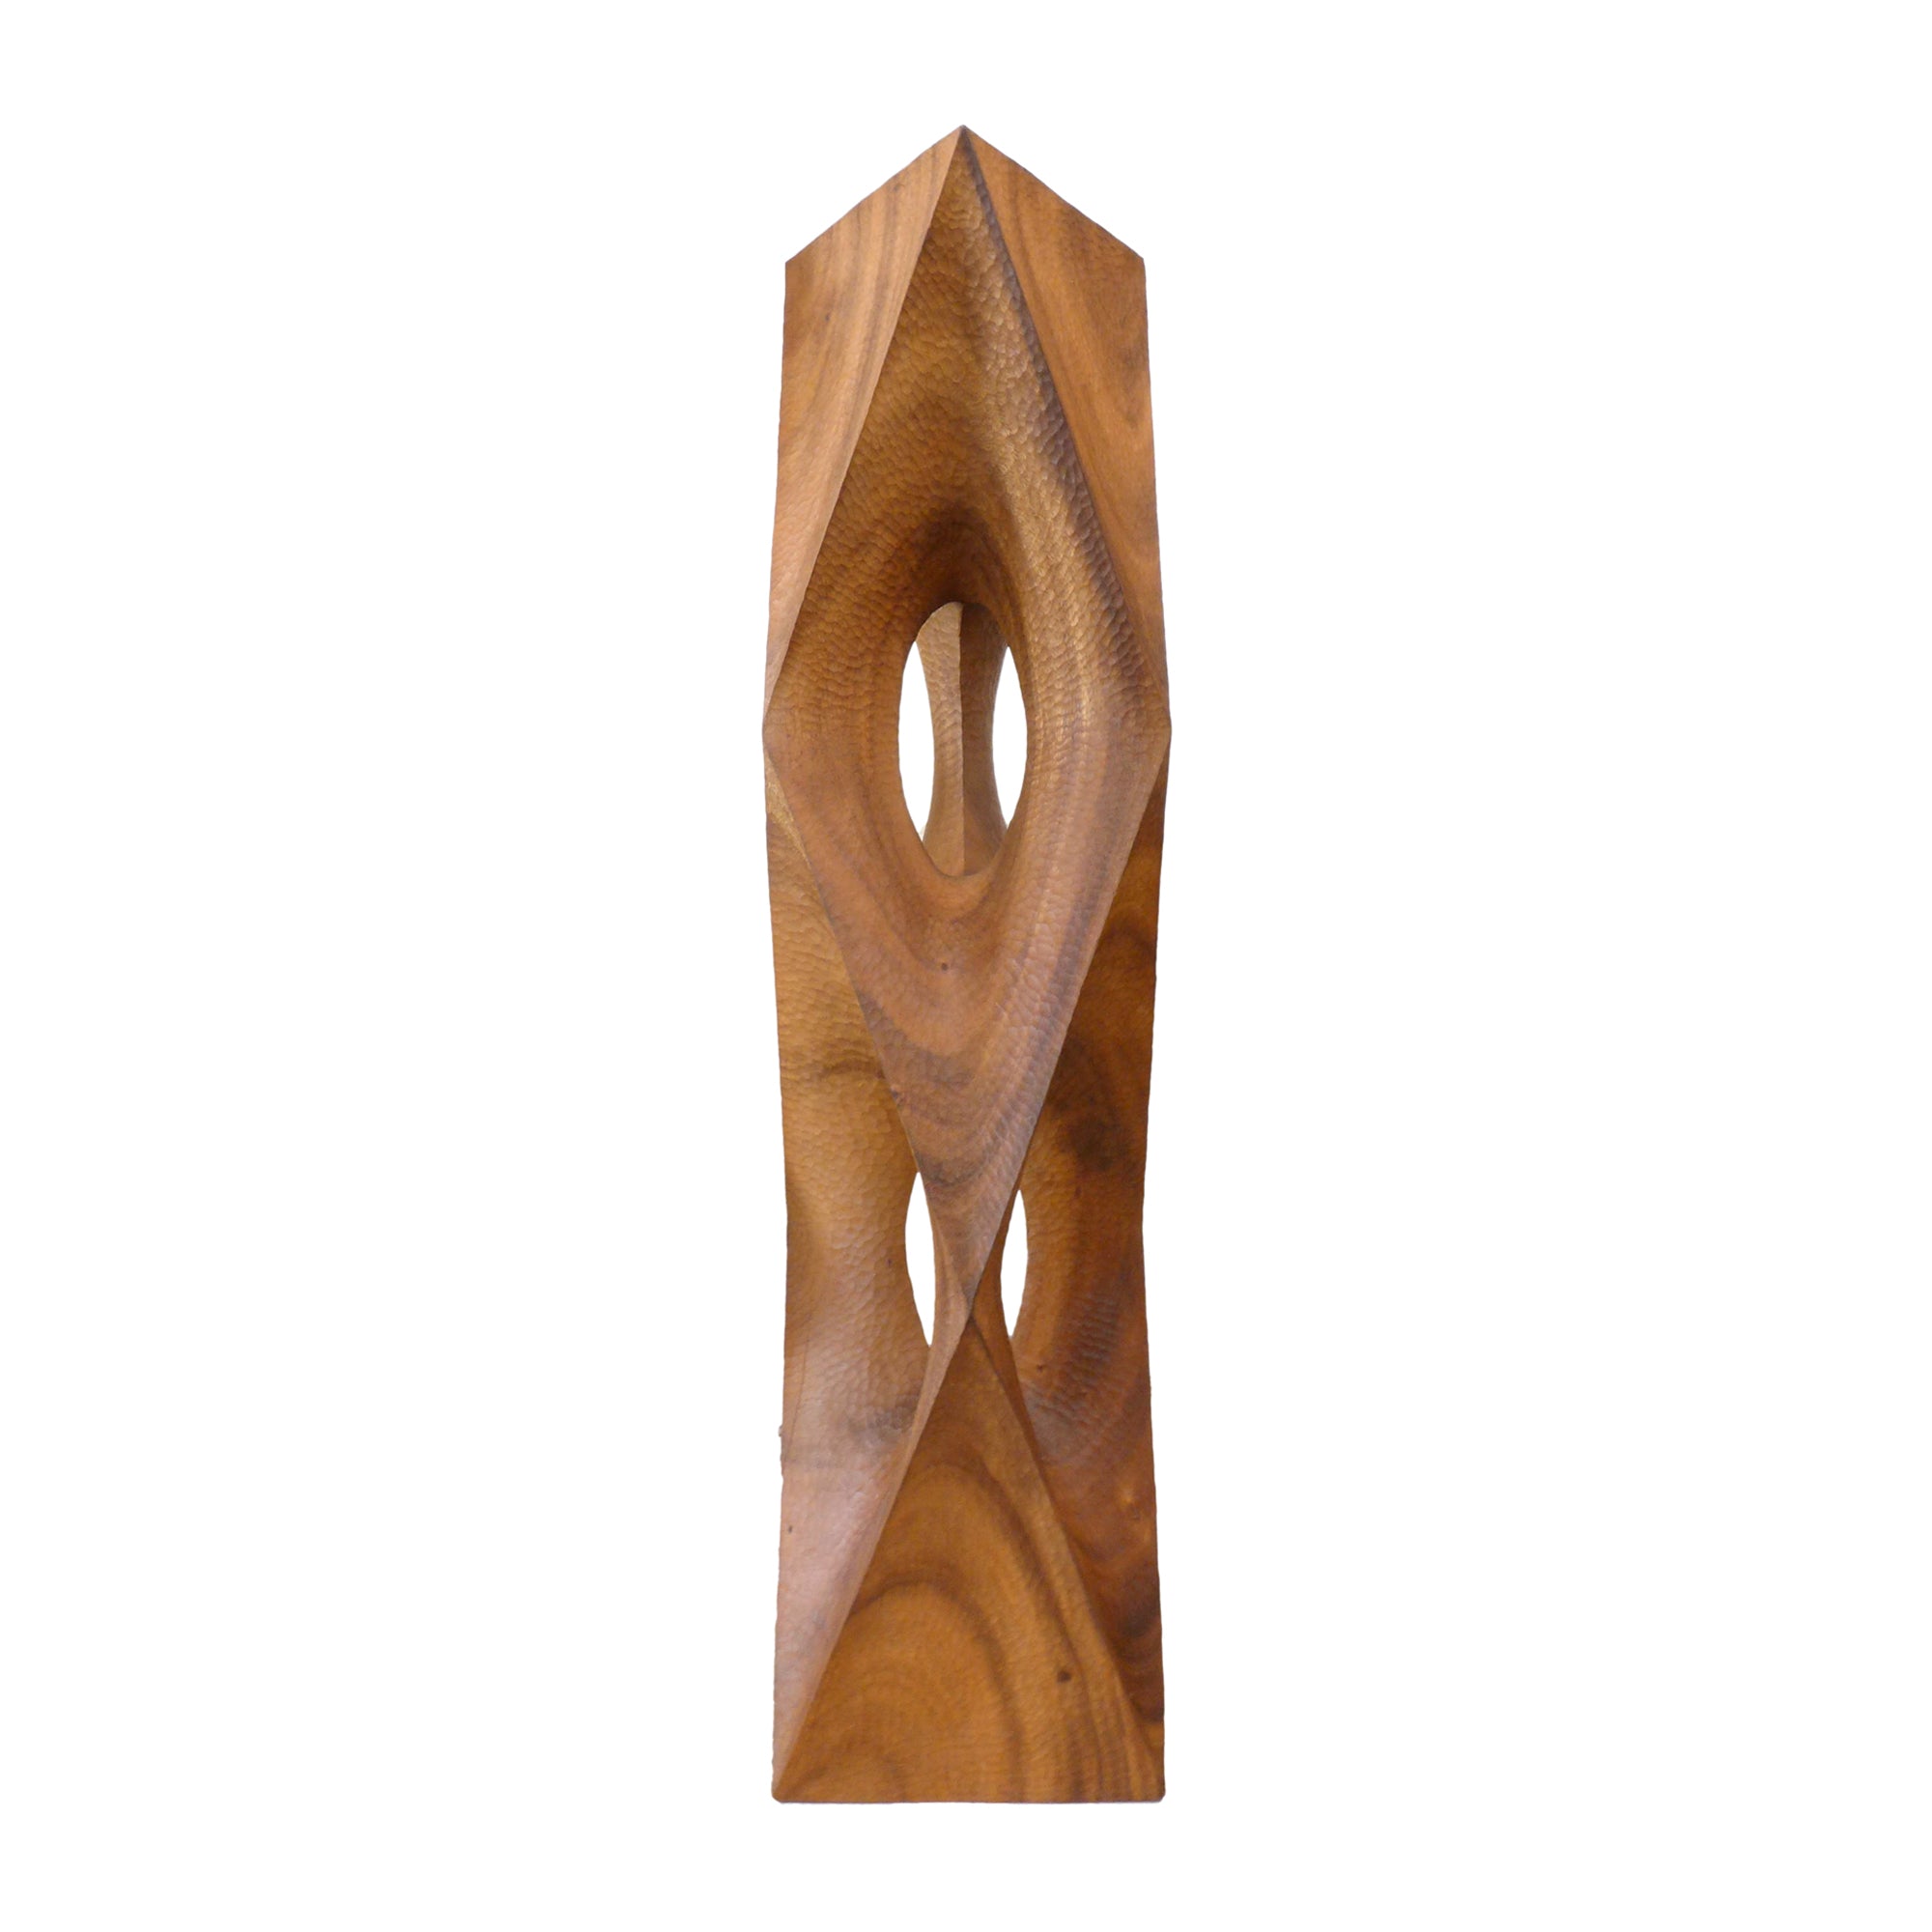 Contemporary Carved Wood "Hard/Soft" Totem Sculpture by Aleph Geddis